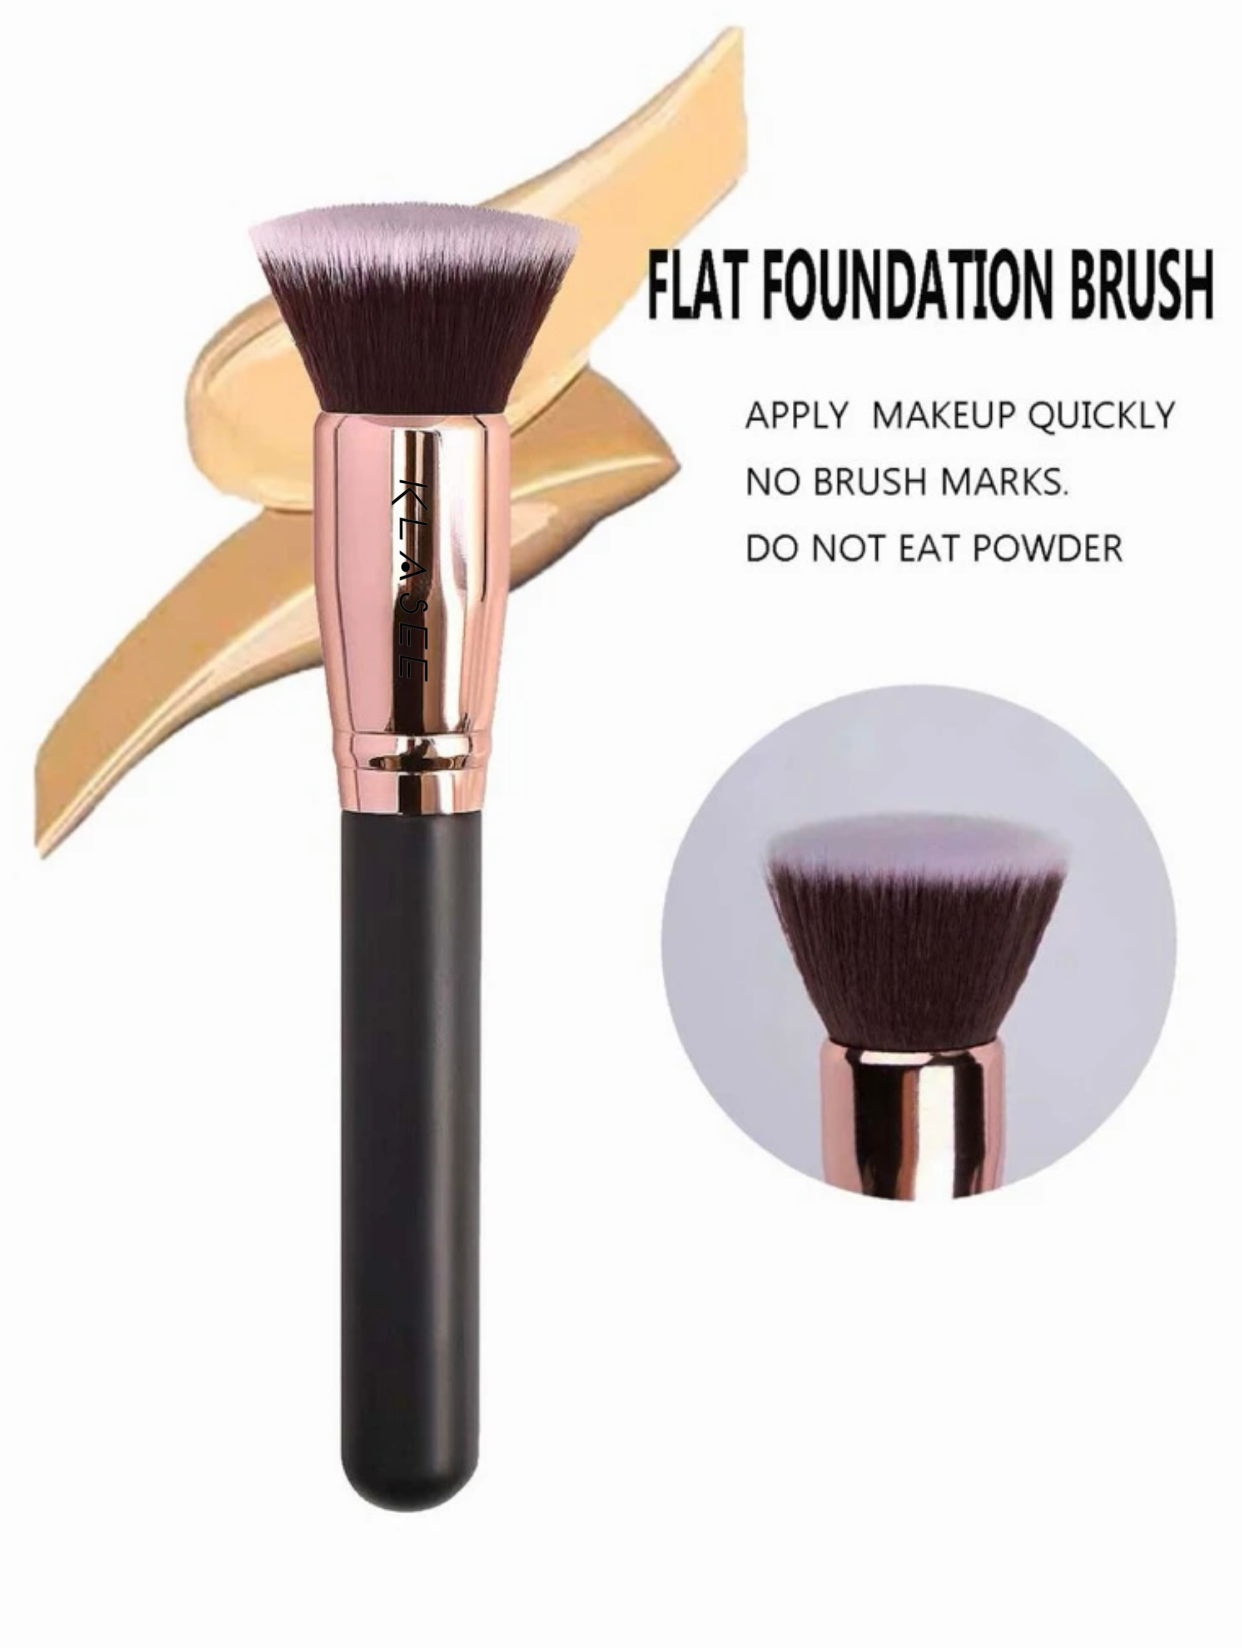 Klasee Beauty Flat Top Foundation Makeup Brush with Dense Synthetic Bristles